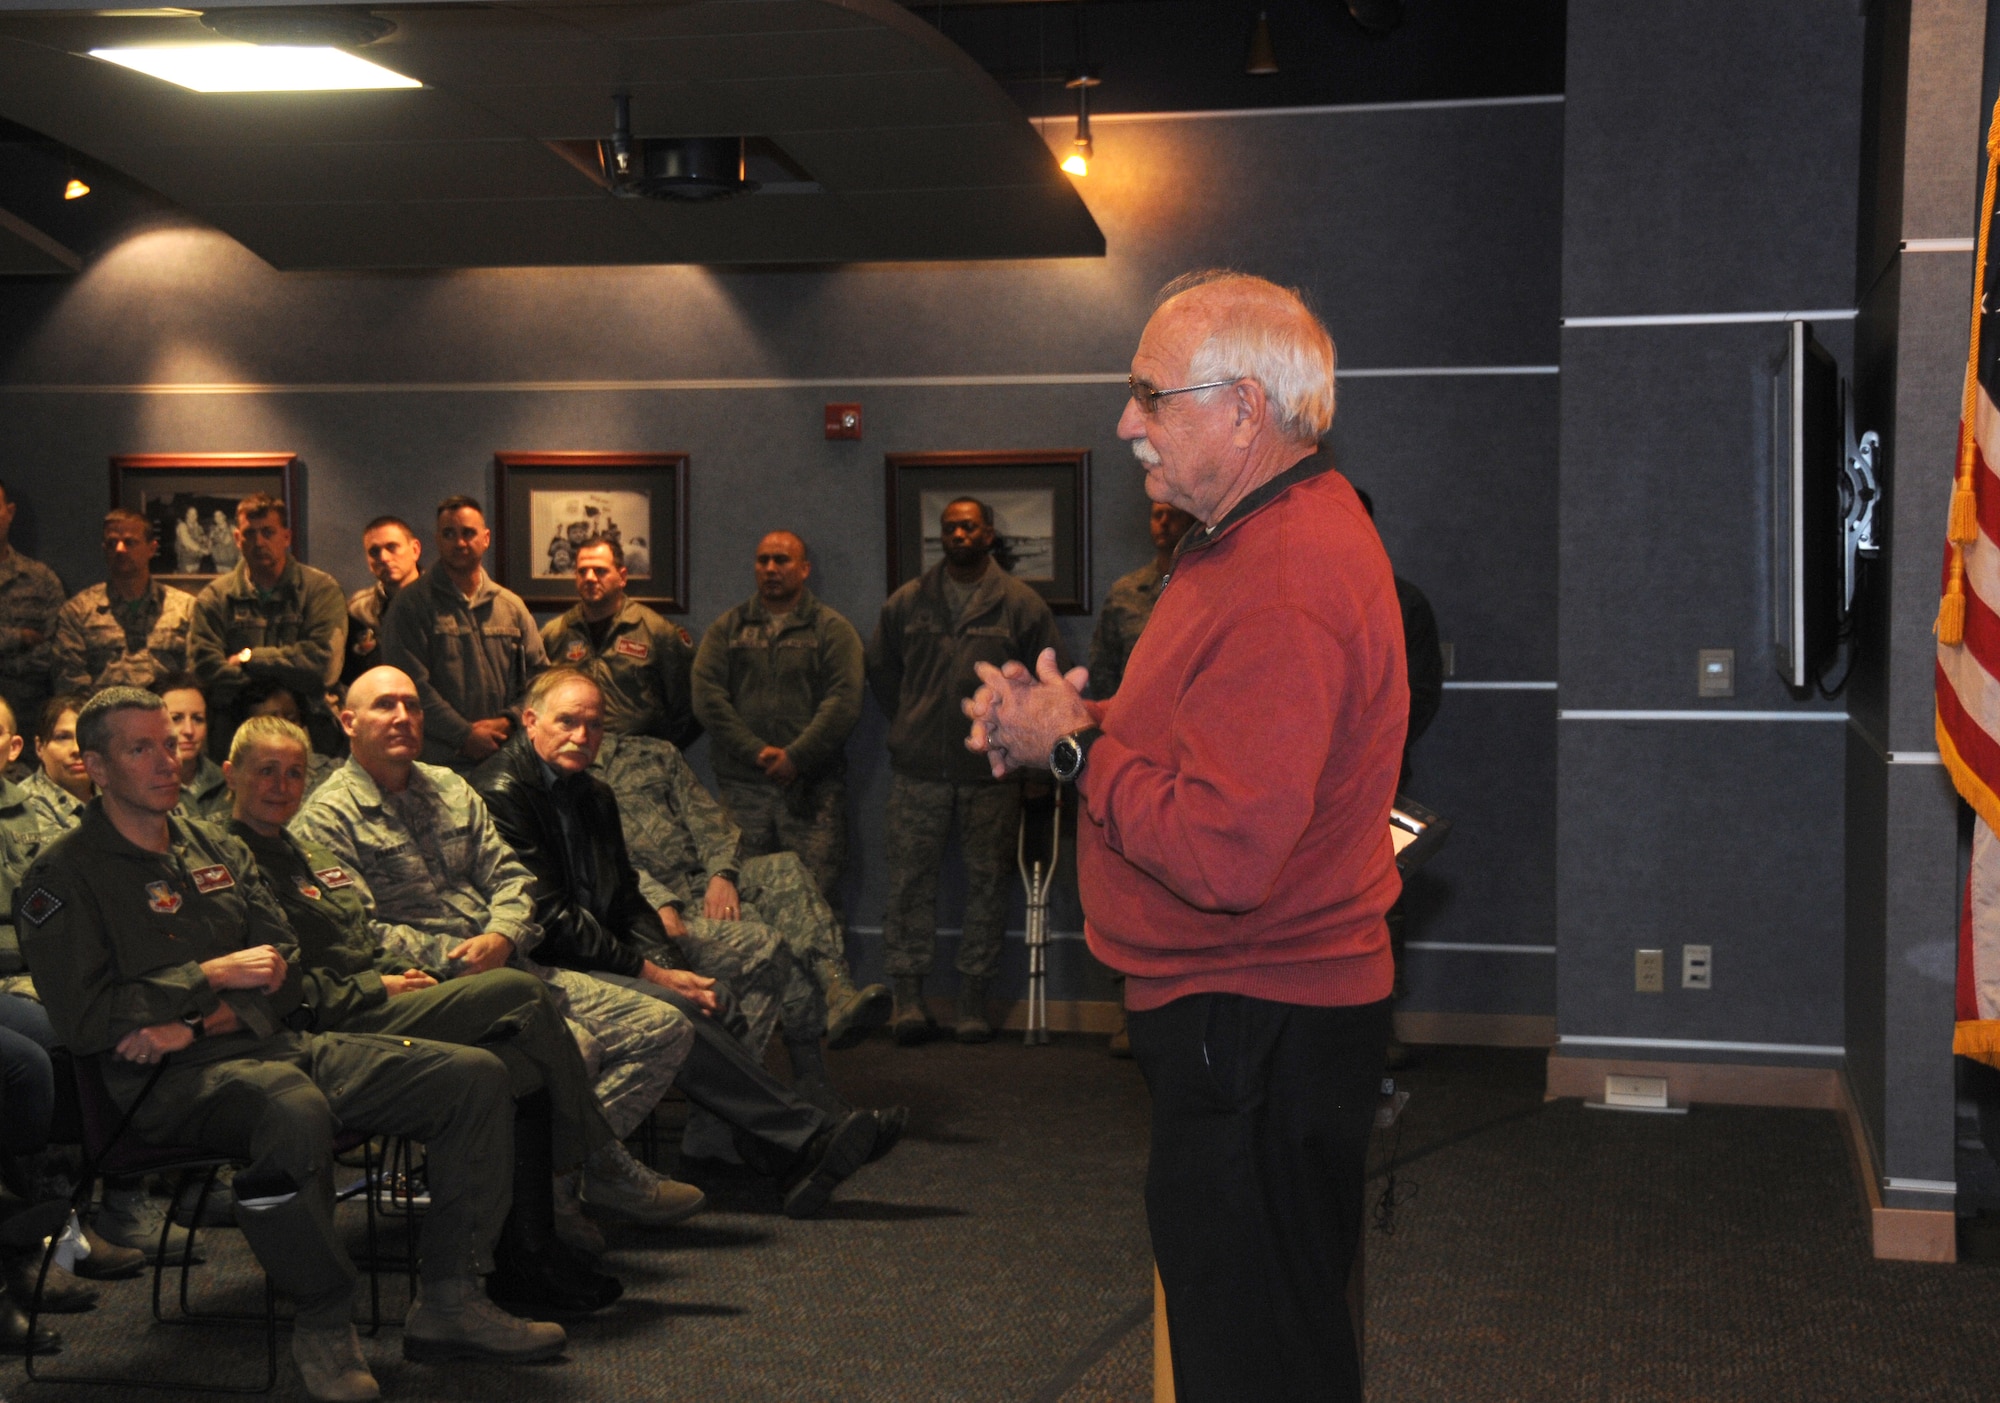 Mr. Larry Brown speaks at Ebbing Air National Guard Base, Fort Smith, Ark., Jan. 9, 2015. Brown spoke to the service members about his son, U.S. Navy SEAL Adam Brown, whose story was made famous in the book "Fearless" by Eric Blehm. The book was written after his son made the ultimate sacrifice in support of Operation Enduring Freedom. (U.S. Air National Guard photo by Airman 1st Class Cody Martin/released)